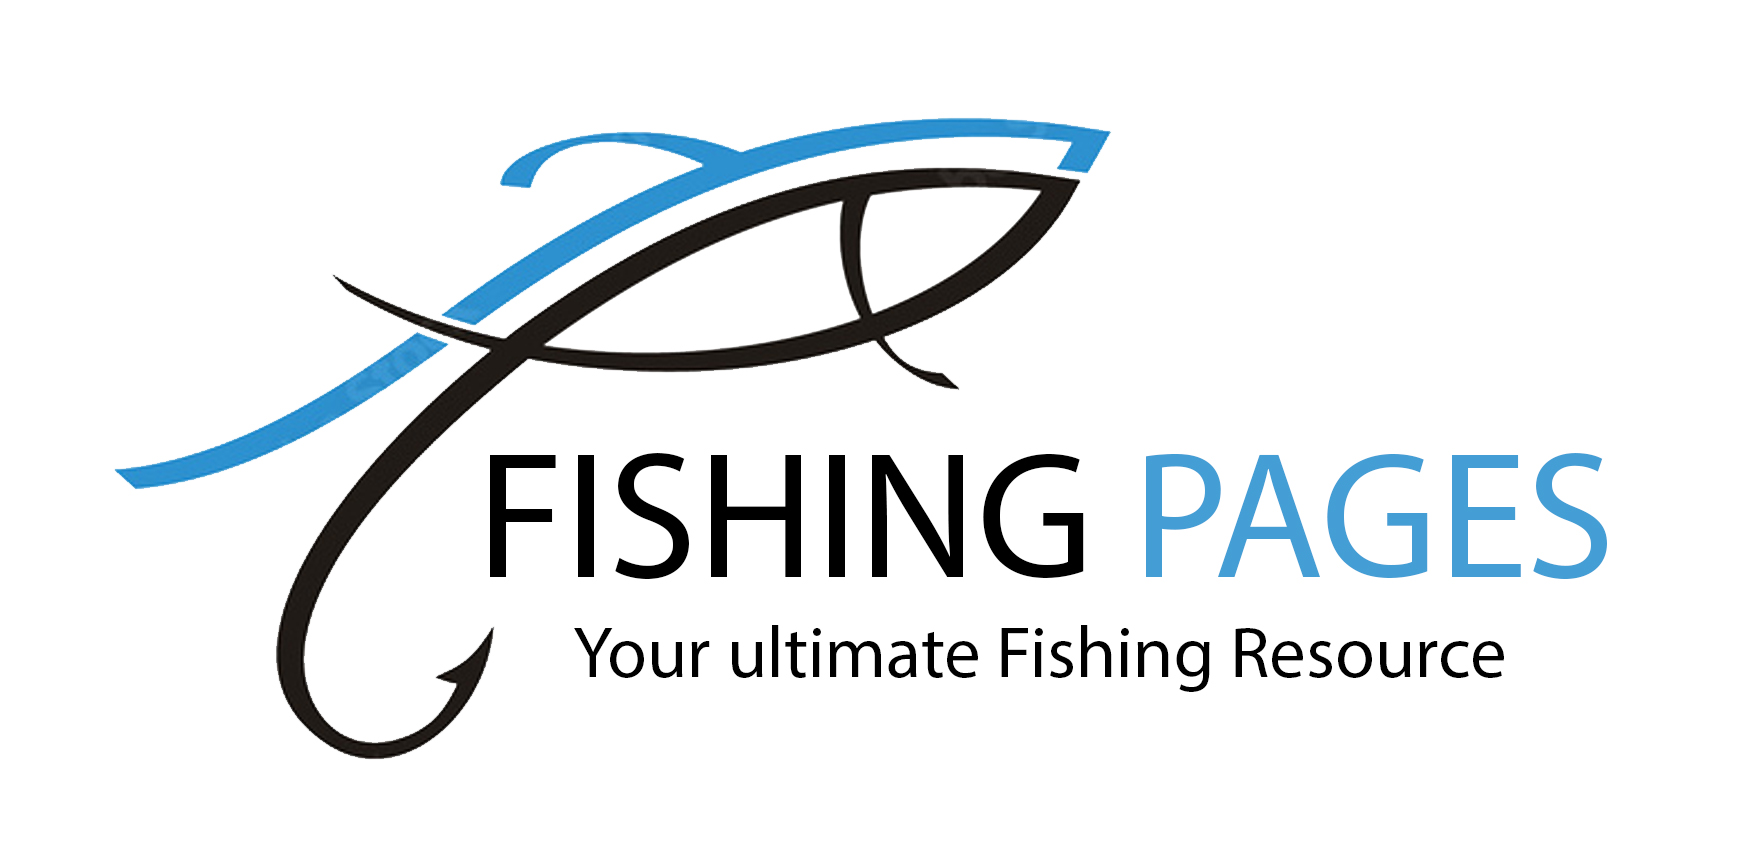 FishingPages Articles